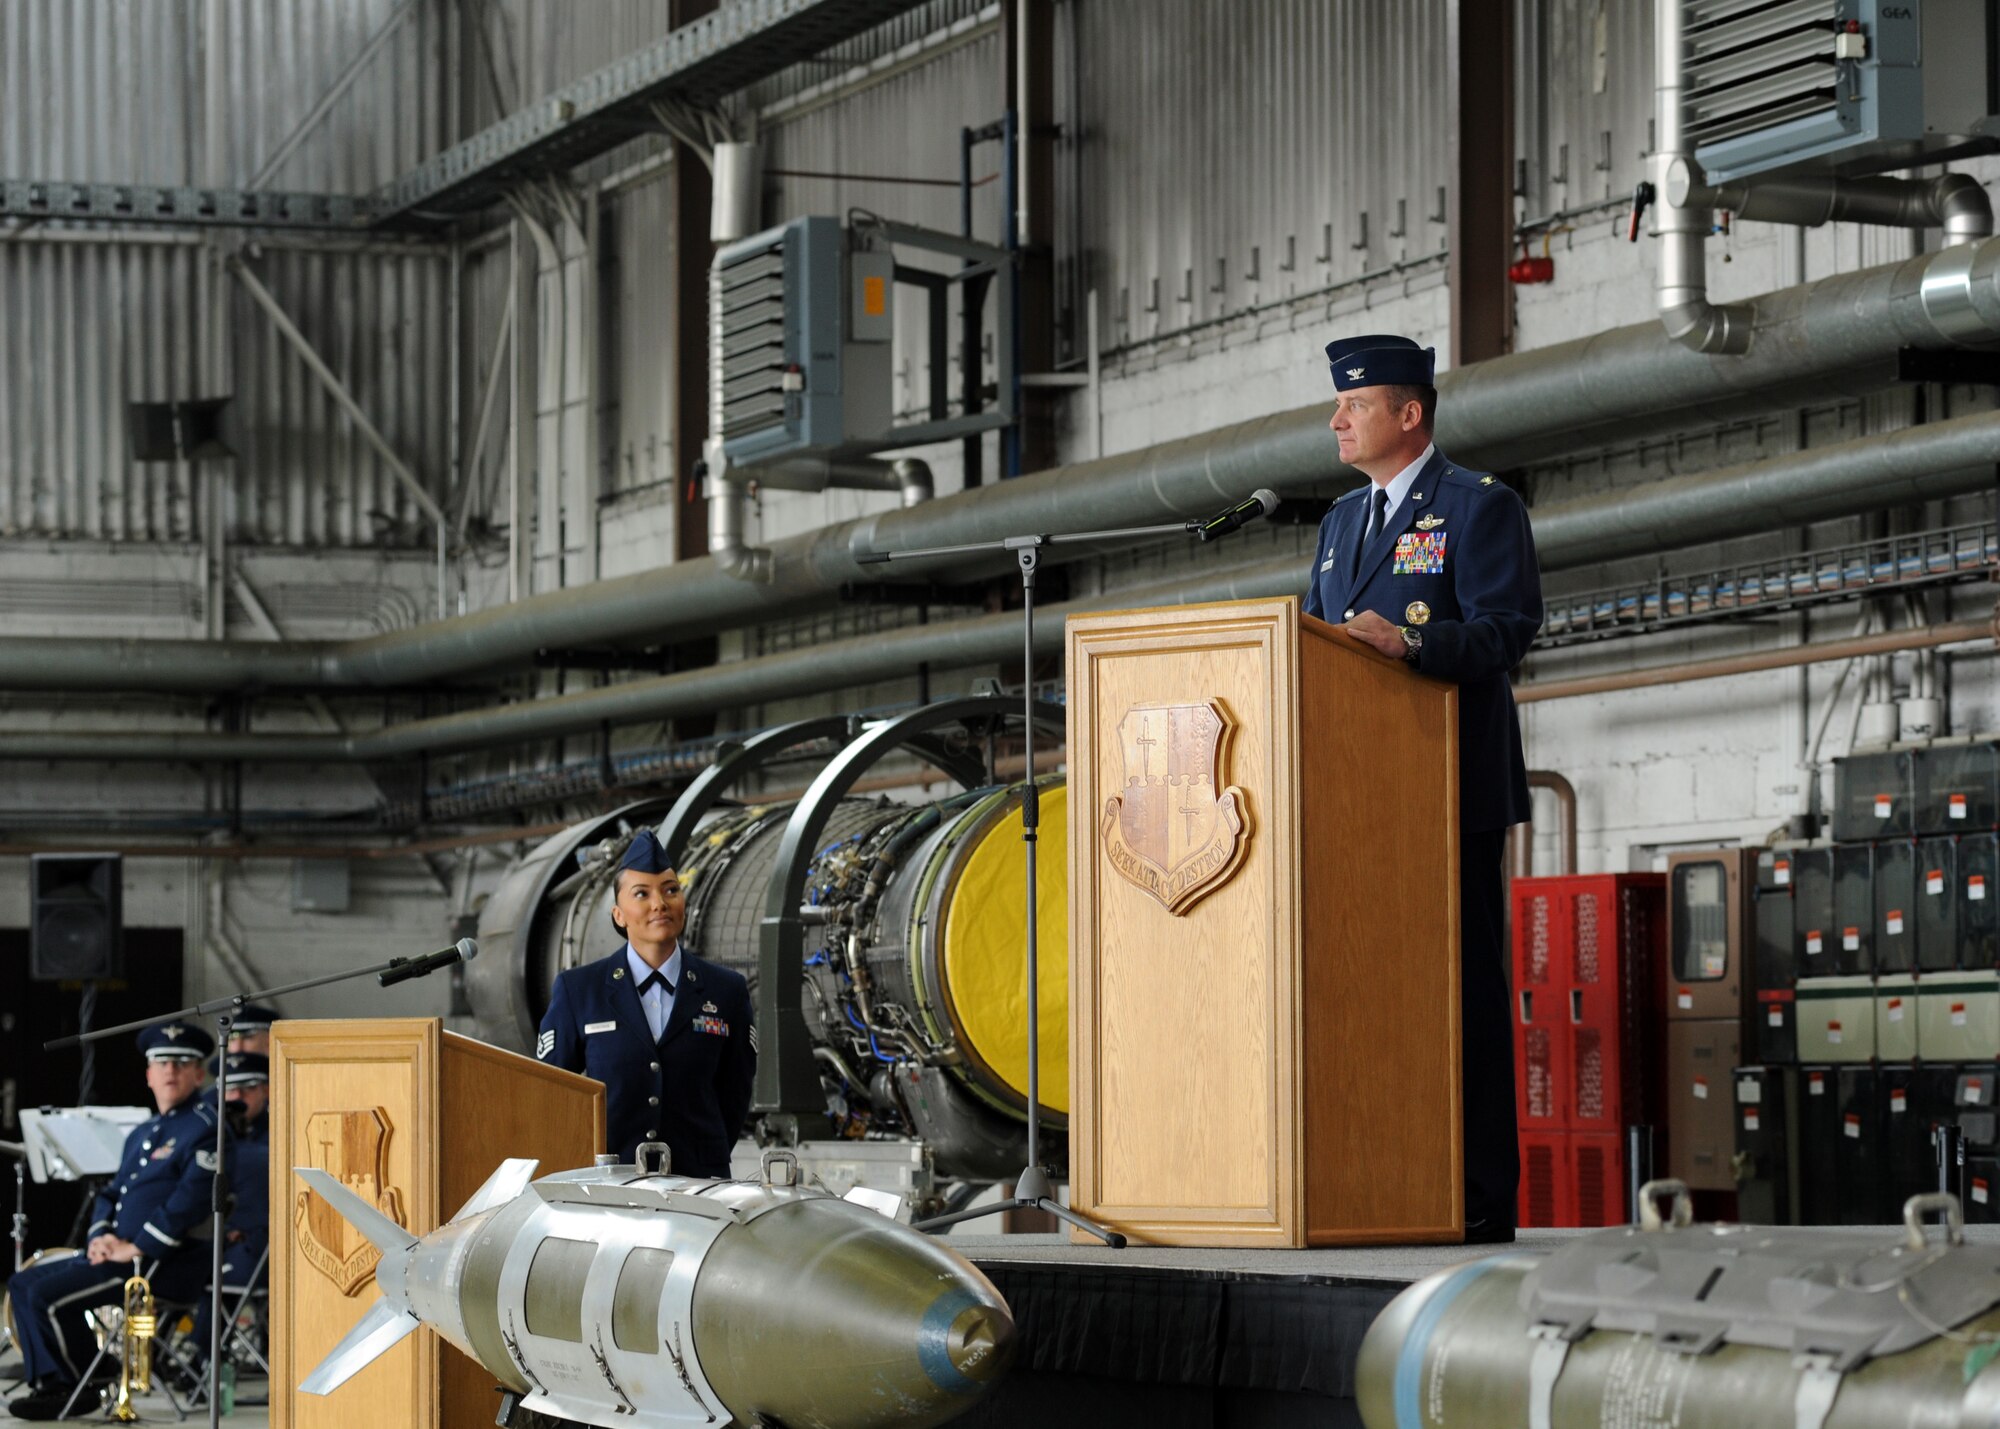 U.S. Air Force Col. Peter Bilodeau, 52nd Fighter Wing commander, prepares to address the Saber Nation during an assumption of command ceremony in Hangar 1 at Spangdahlem Air Base, Germany, July 11, 2014. An assumption of command is a military tradition that represents a formal transfer of authority and responsibility for a unit to a commanding officer. (U.S. Air Force photo by Airman 1st Class Dylan Nuckolls/Released)